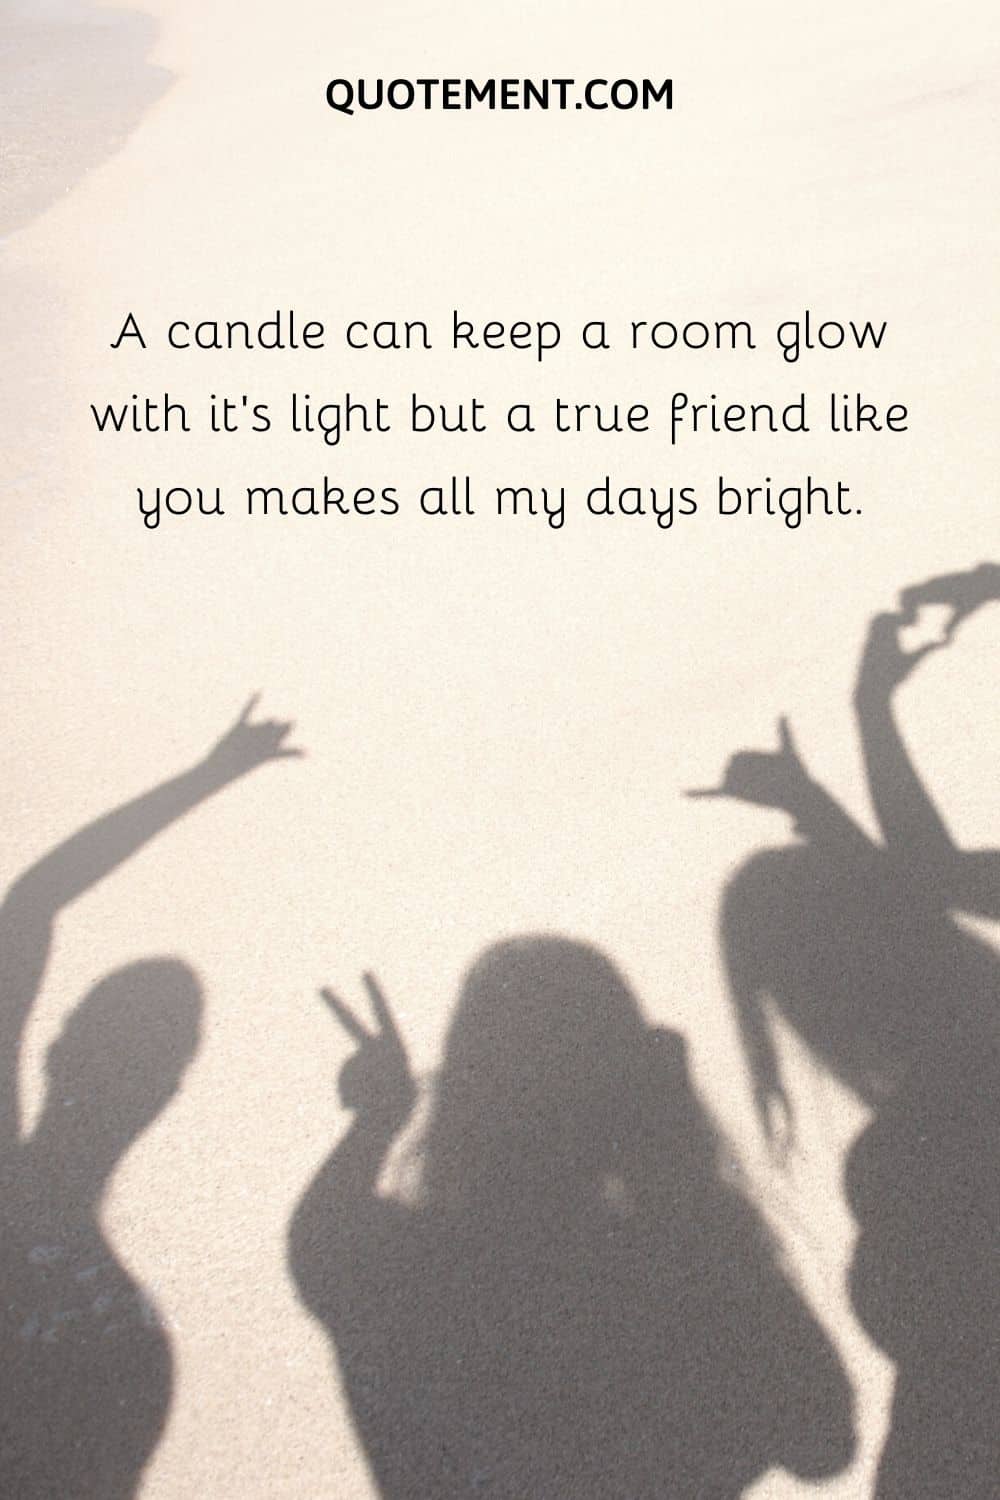 A candle can keep a room glow with it’s light but a true friend like you makes all my days bright.